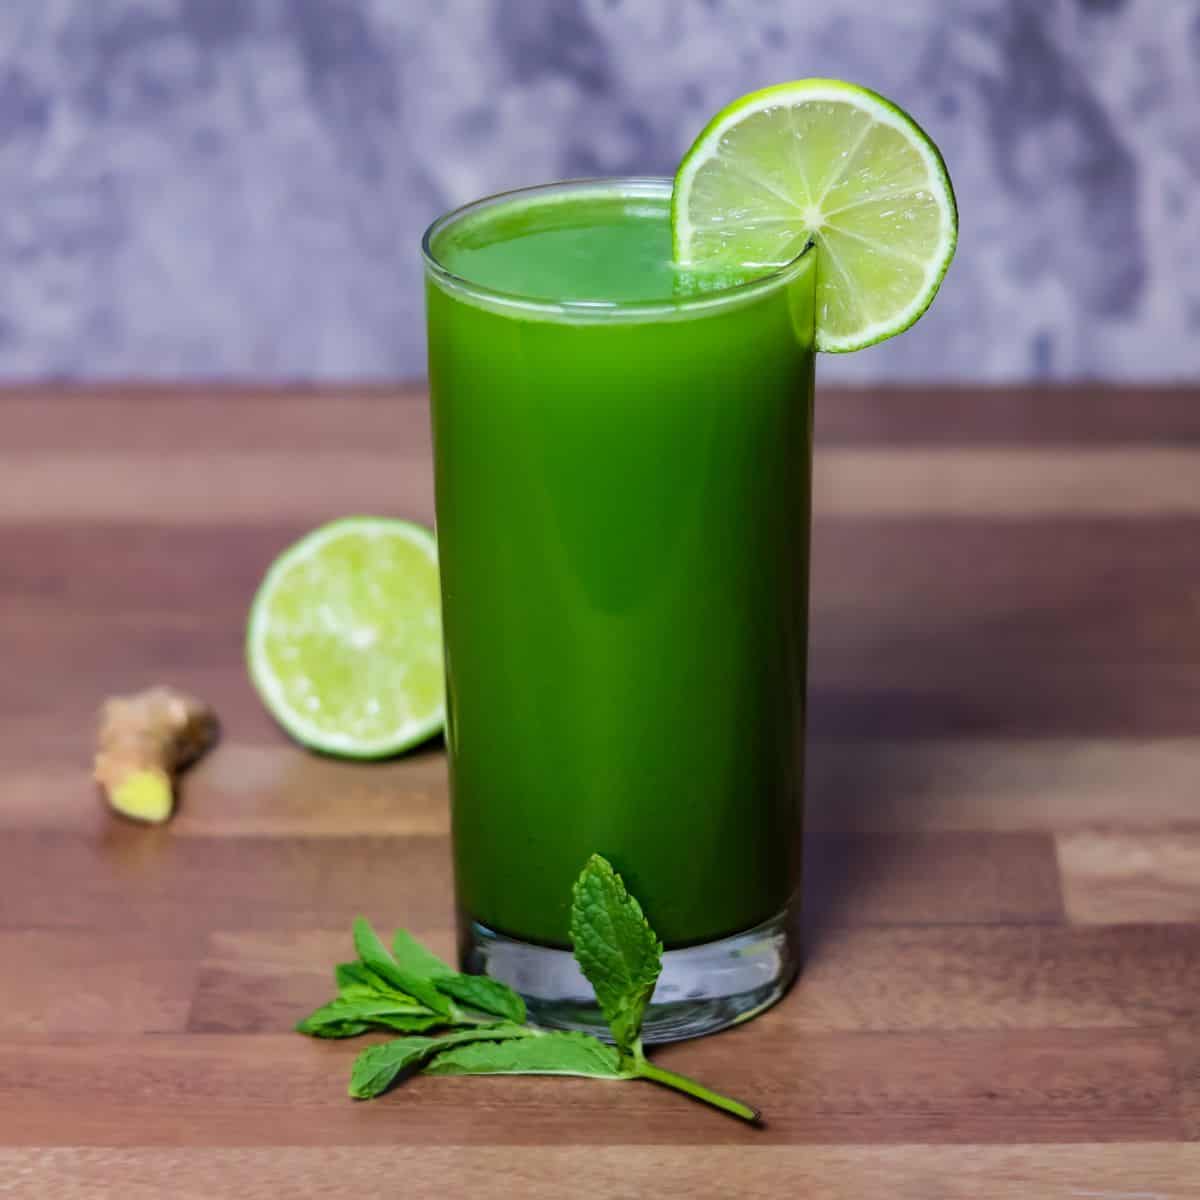 A glass of vibrant green cucumber juice garnished with a slice of lime, with fresh mint leaves.